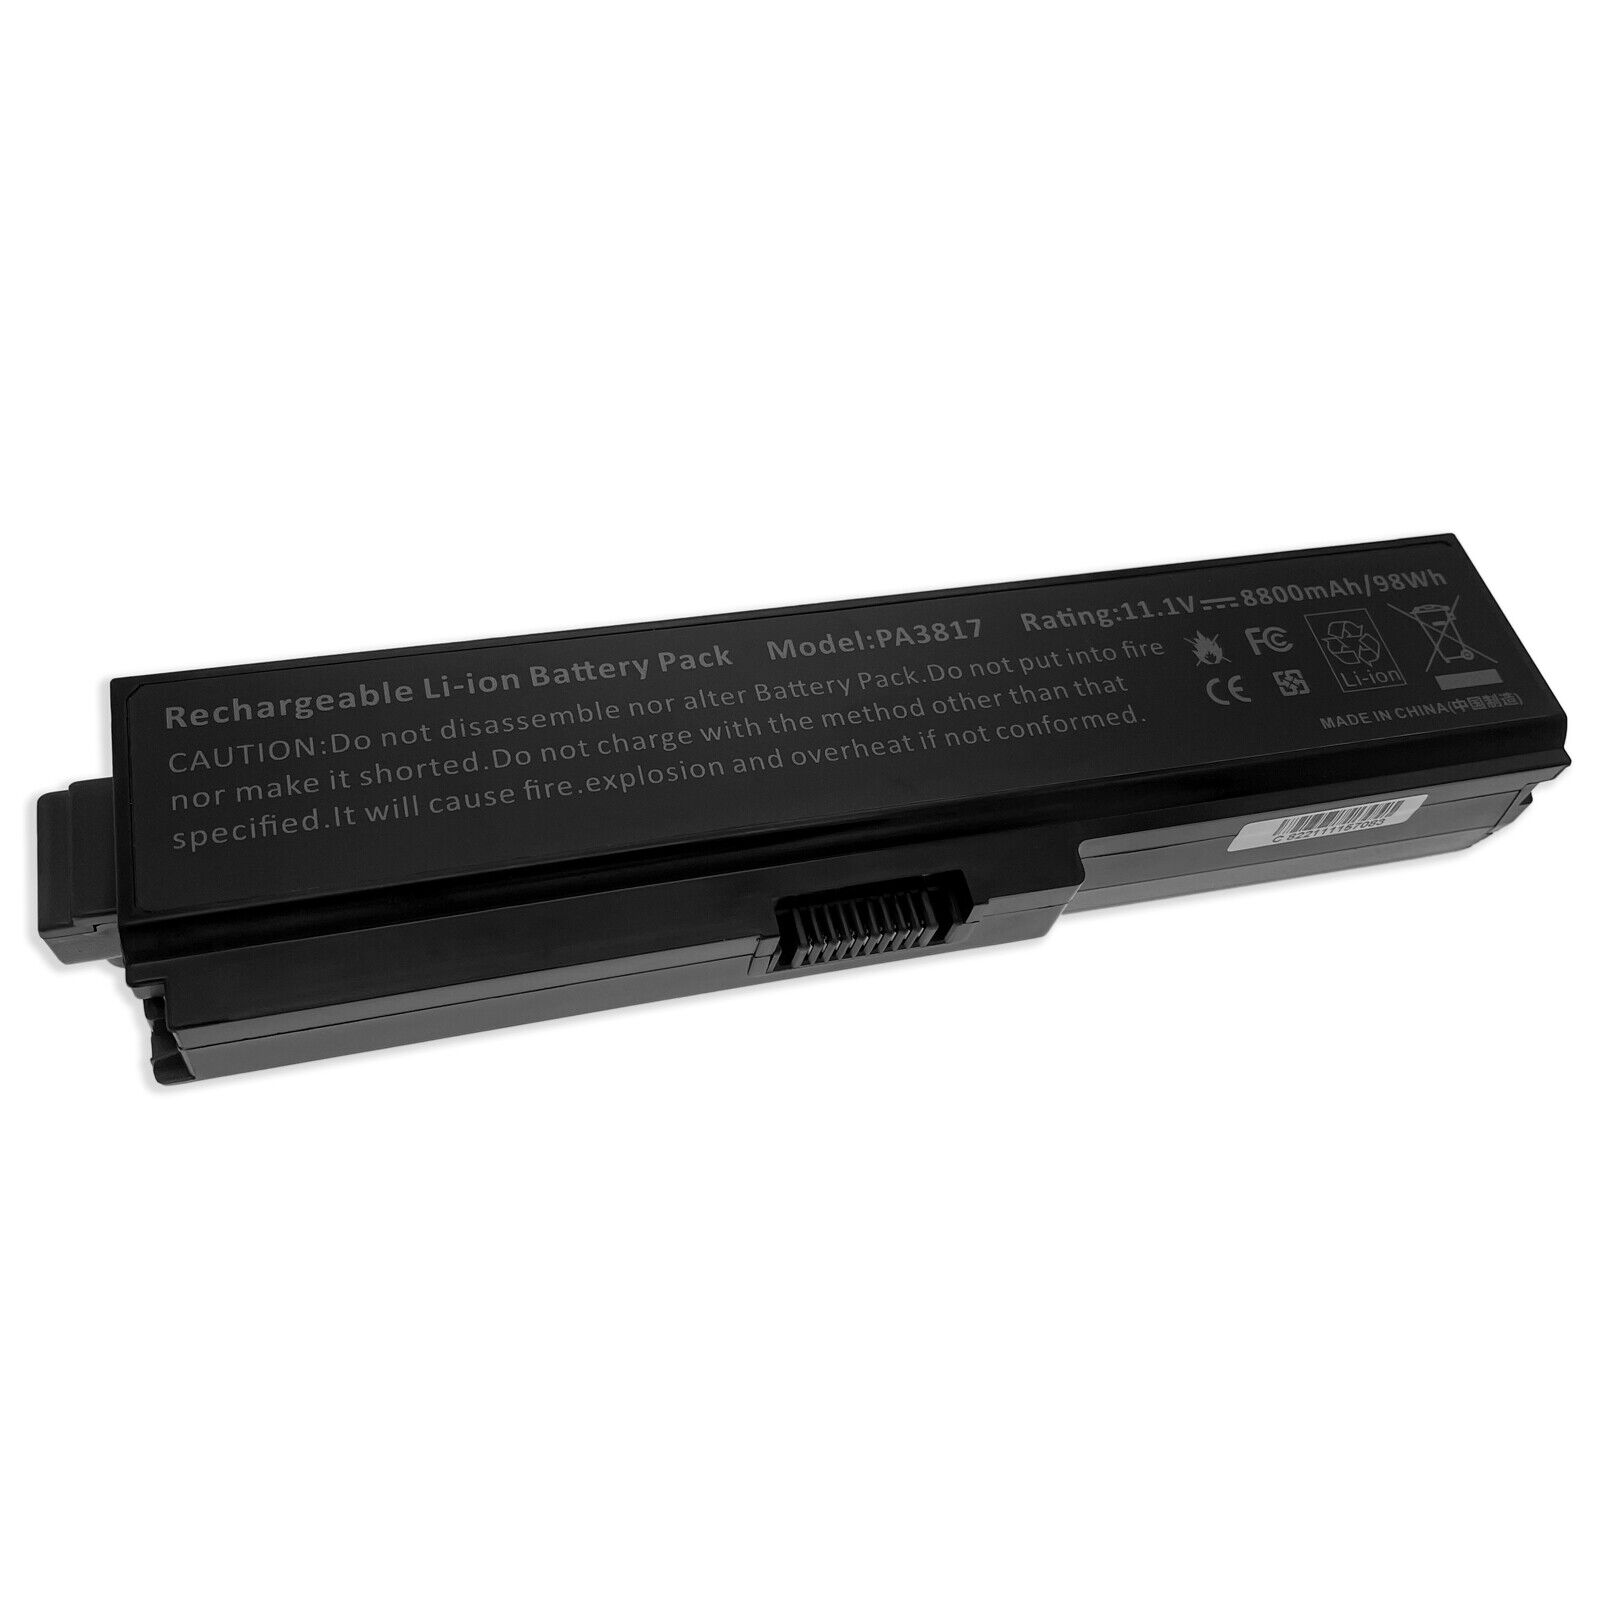 New 12 Cell 95WH Laptop Battery For Toshiba PA3819U-1BRS PABAS230 PA3817U-1BRS